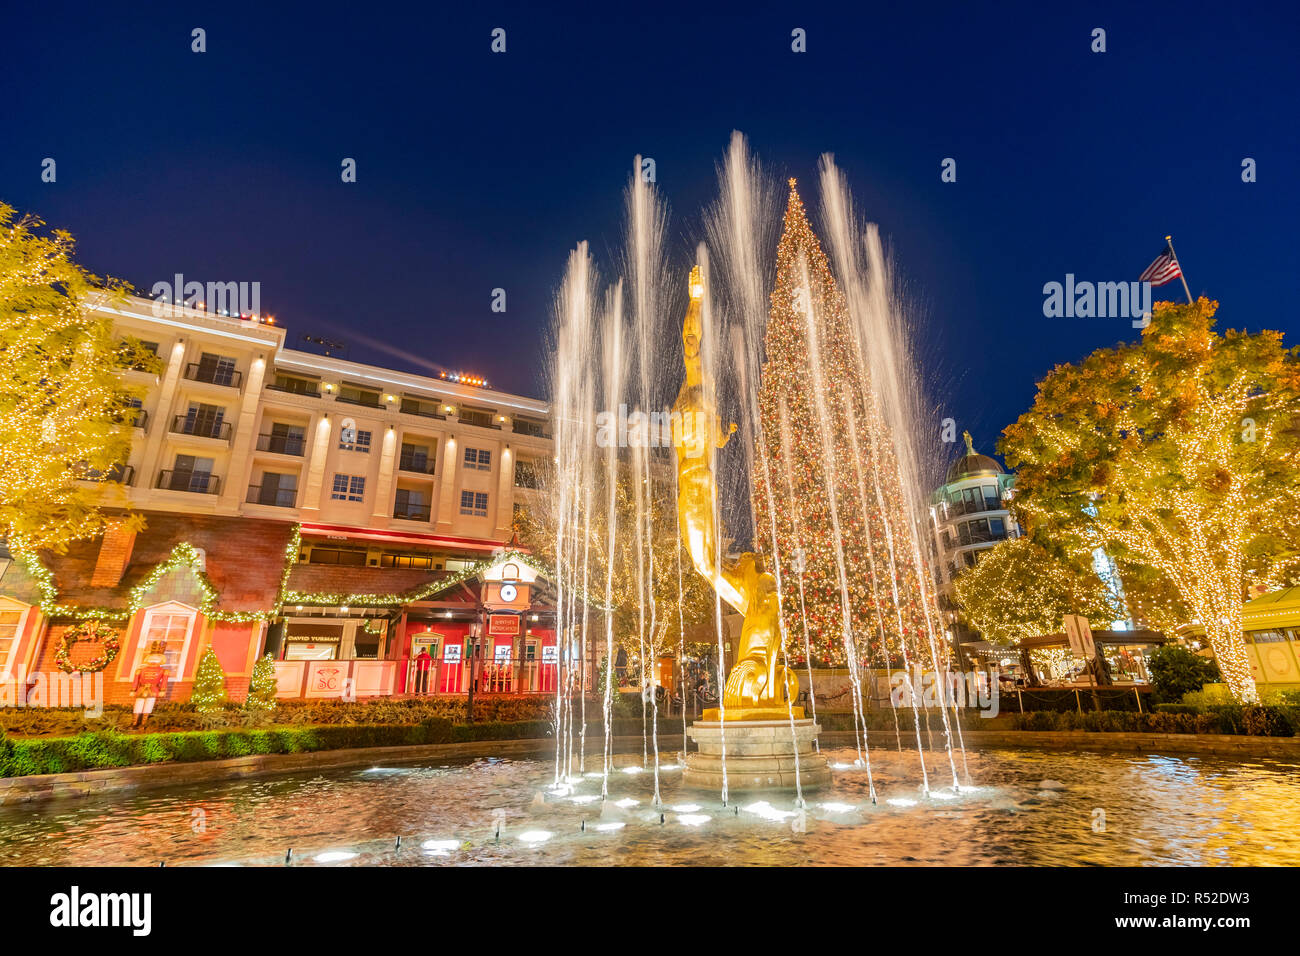 Los Angeles, NOV 26: Night view of the fountain and the public art Spirit of American Youth in The Americana at Brand on NOV 26, 2018 at Los Angeles,  Stock Photo